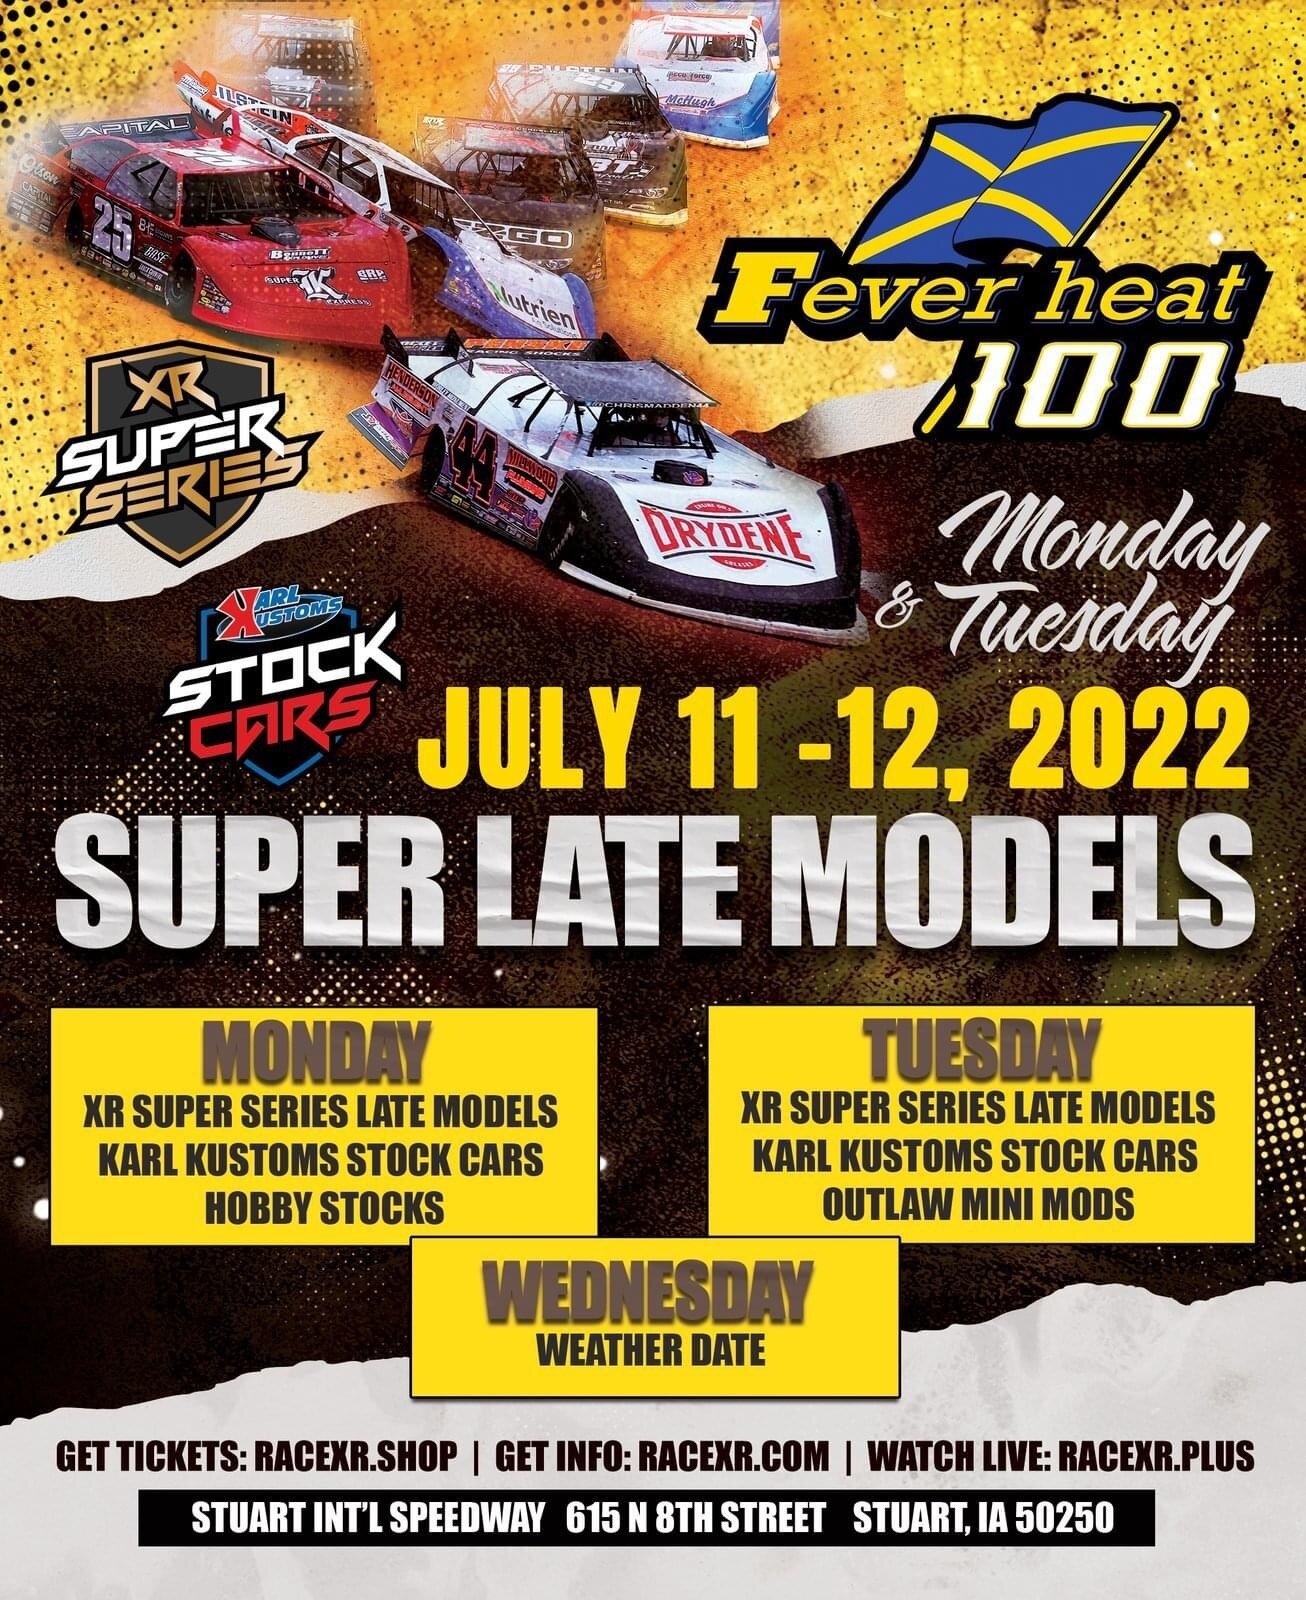 We are off this weekend and next as we prepare for our next @race_xr @karl_kustoms Stock Car event, the Fever Heat 100 at Stuart Speedway on July 11-12!